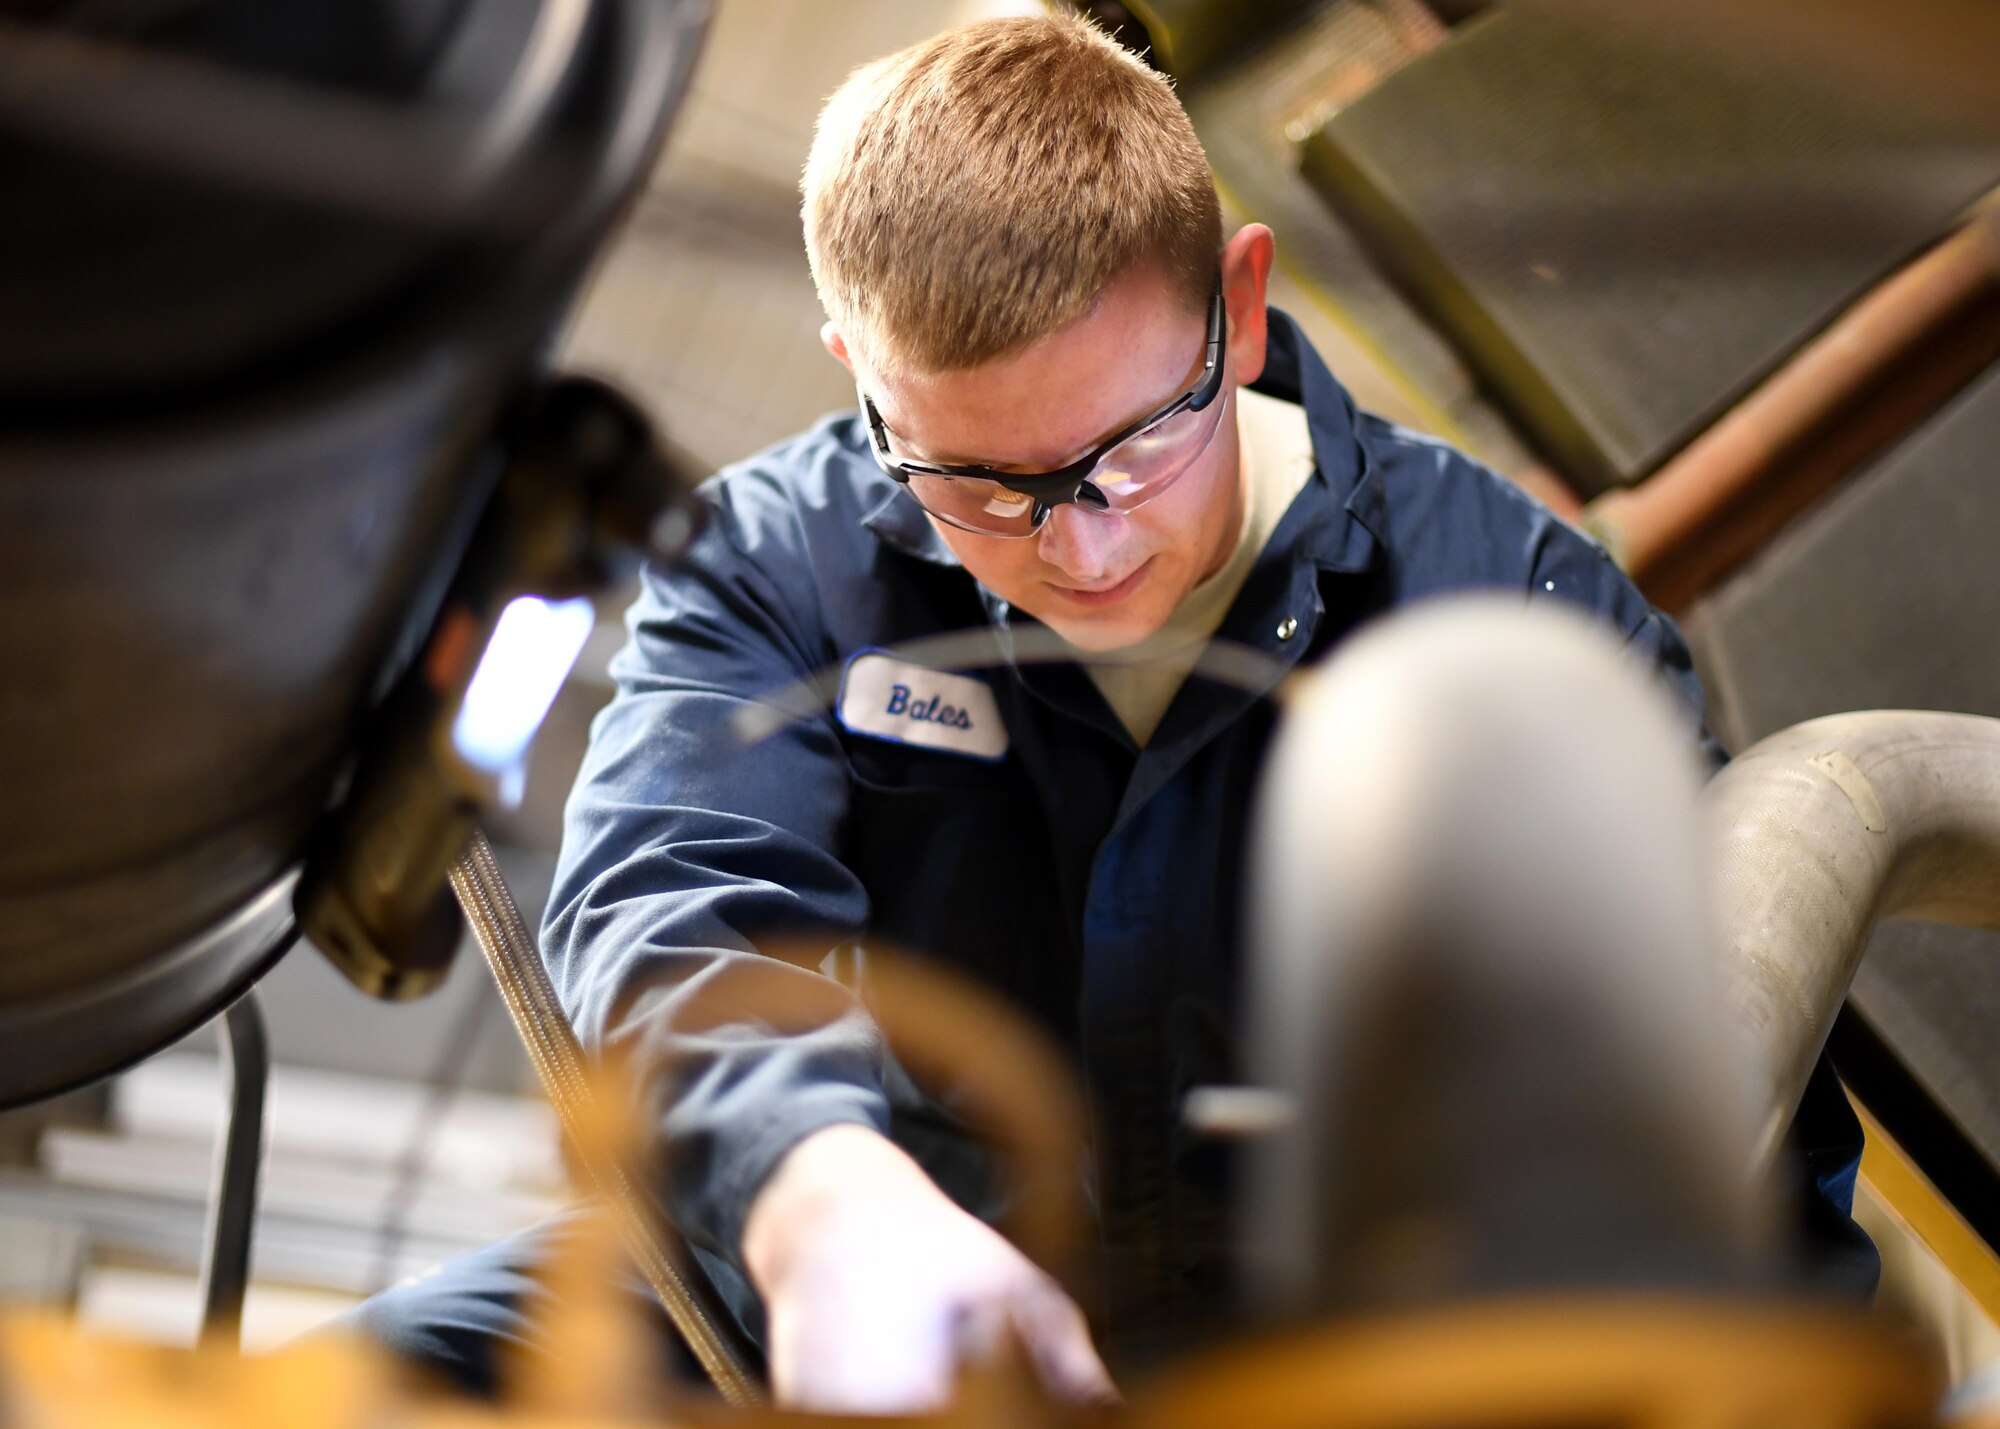 Senior Airman Robert Bales, 319th Logistics Readiness Squadron vehicle maintenance journeyman, performs routine maintenance on an Oshkosh 26’ Snow Plow Oct. 13, 2016, on Grand Forks Air Force Base, N.D. The 319th LRS spends months preparing vehicles for the harsh winter conditions in North Dakota. (U.S. Air Force photo by Senior Airman Ryan Sparks/Released)